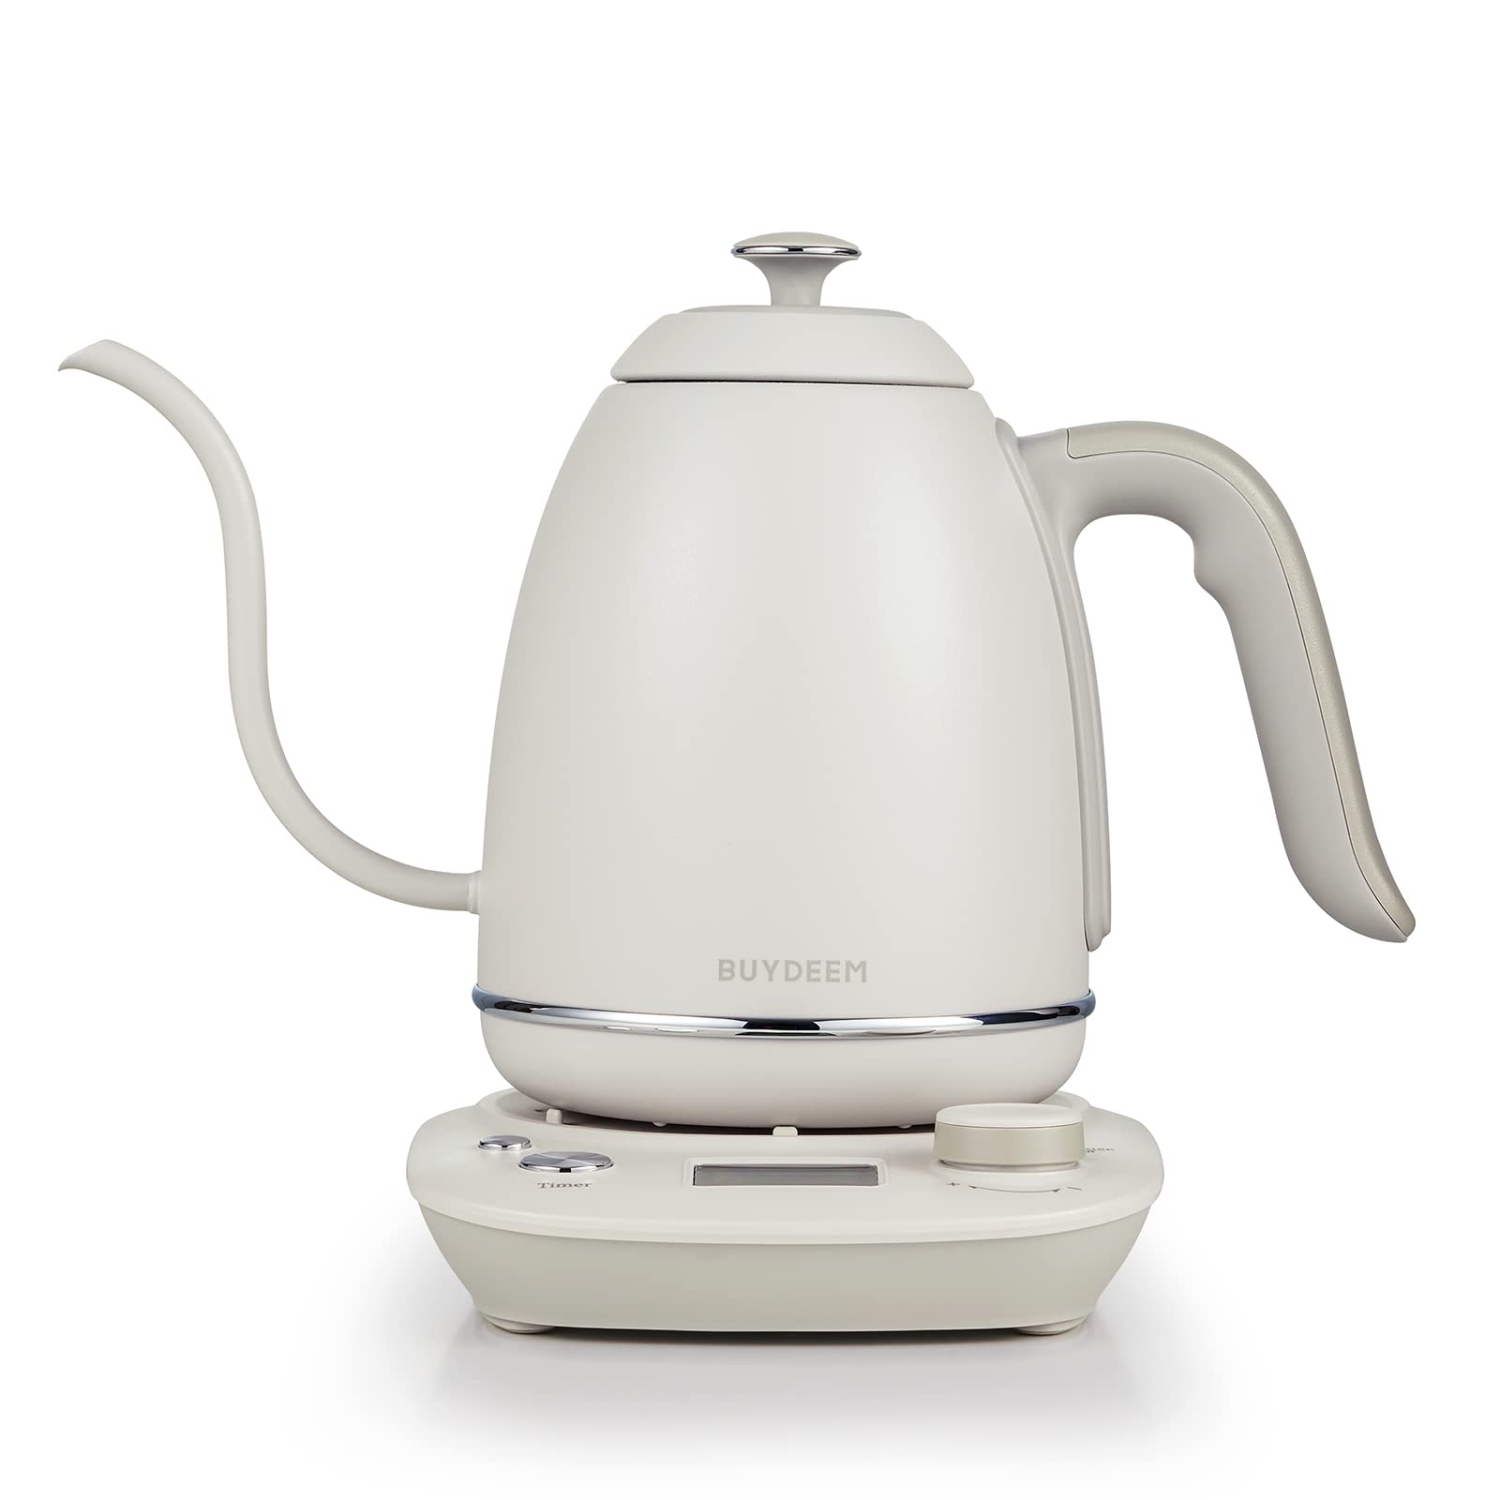 BUYDEEM K821 Electric Gooseneck Kettle with Variable Temperature Control, Pour Over Coffee Tea Kettle, Durable 18/8 Stainless Steel, Auto Keep Warm & Built in Brewing Timer, 0.8L